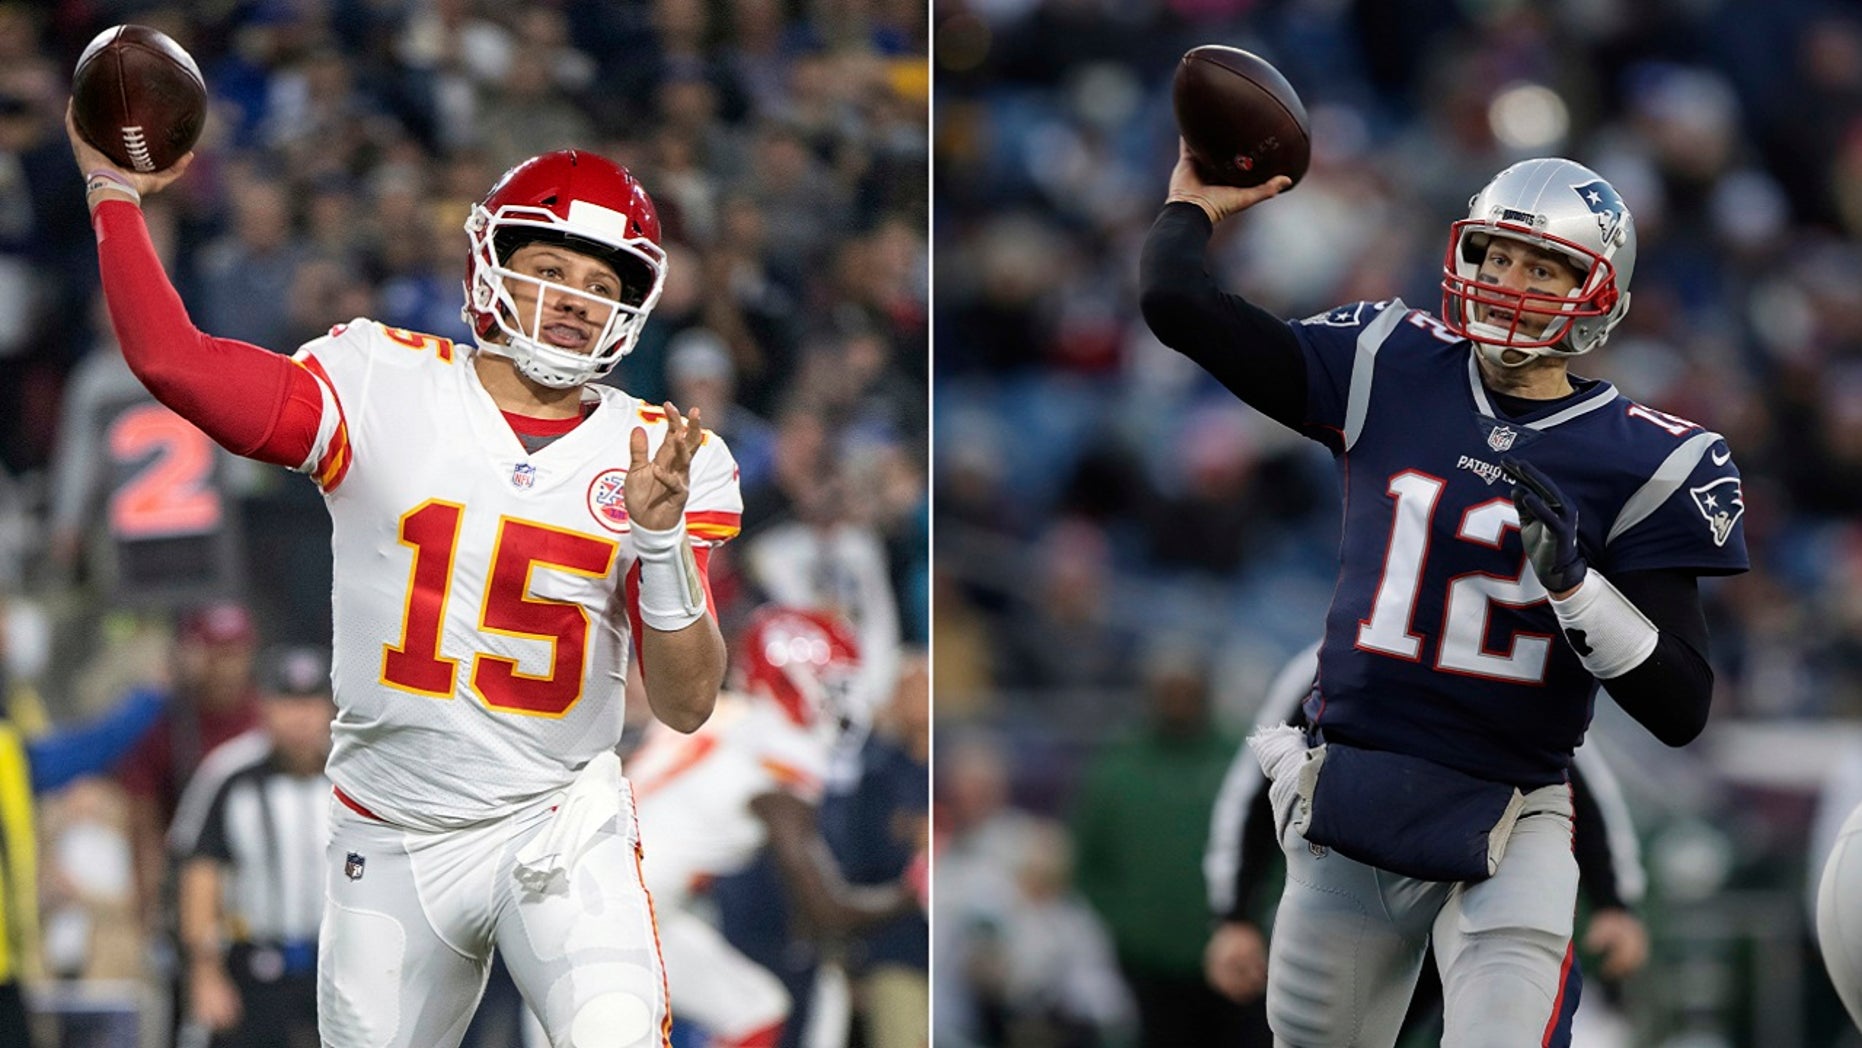 Patriots, Chiefs will face frigid temperatures in AFC title game in Kansas City